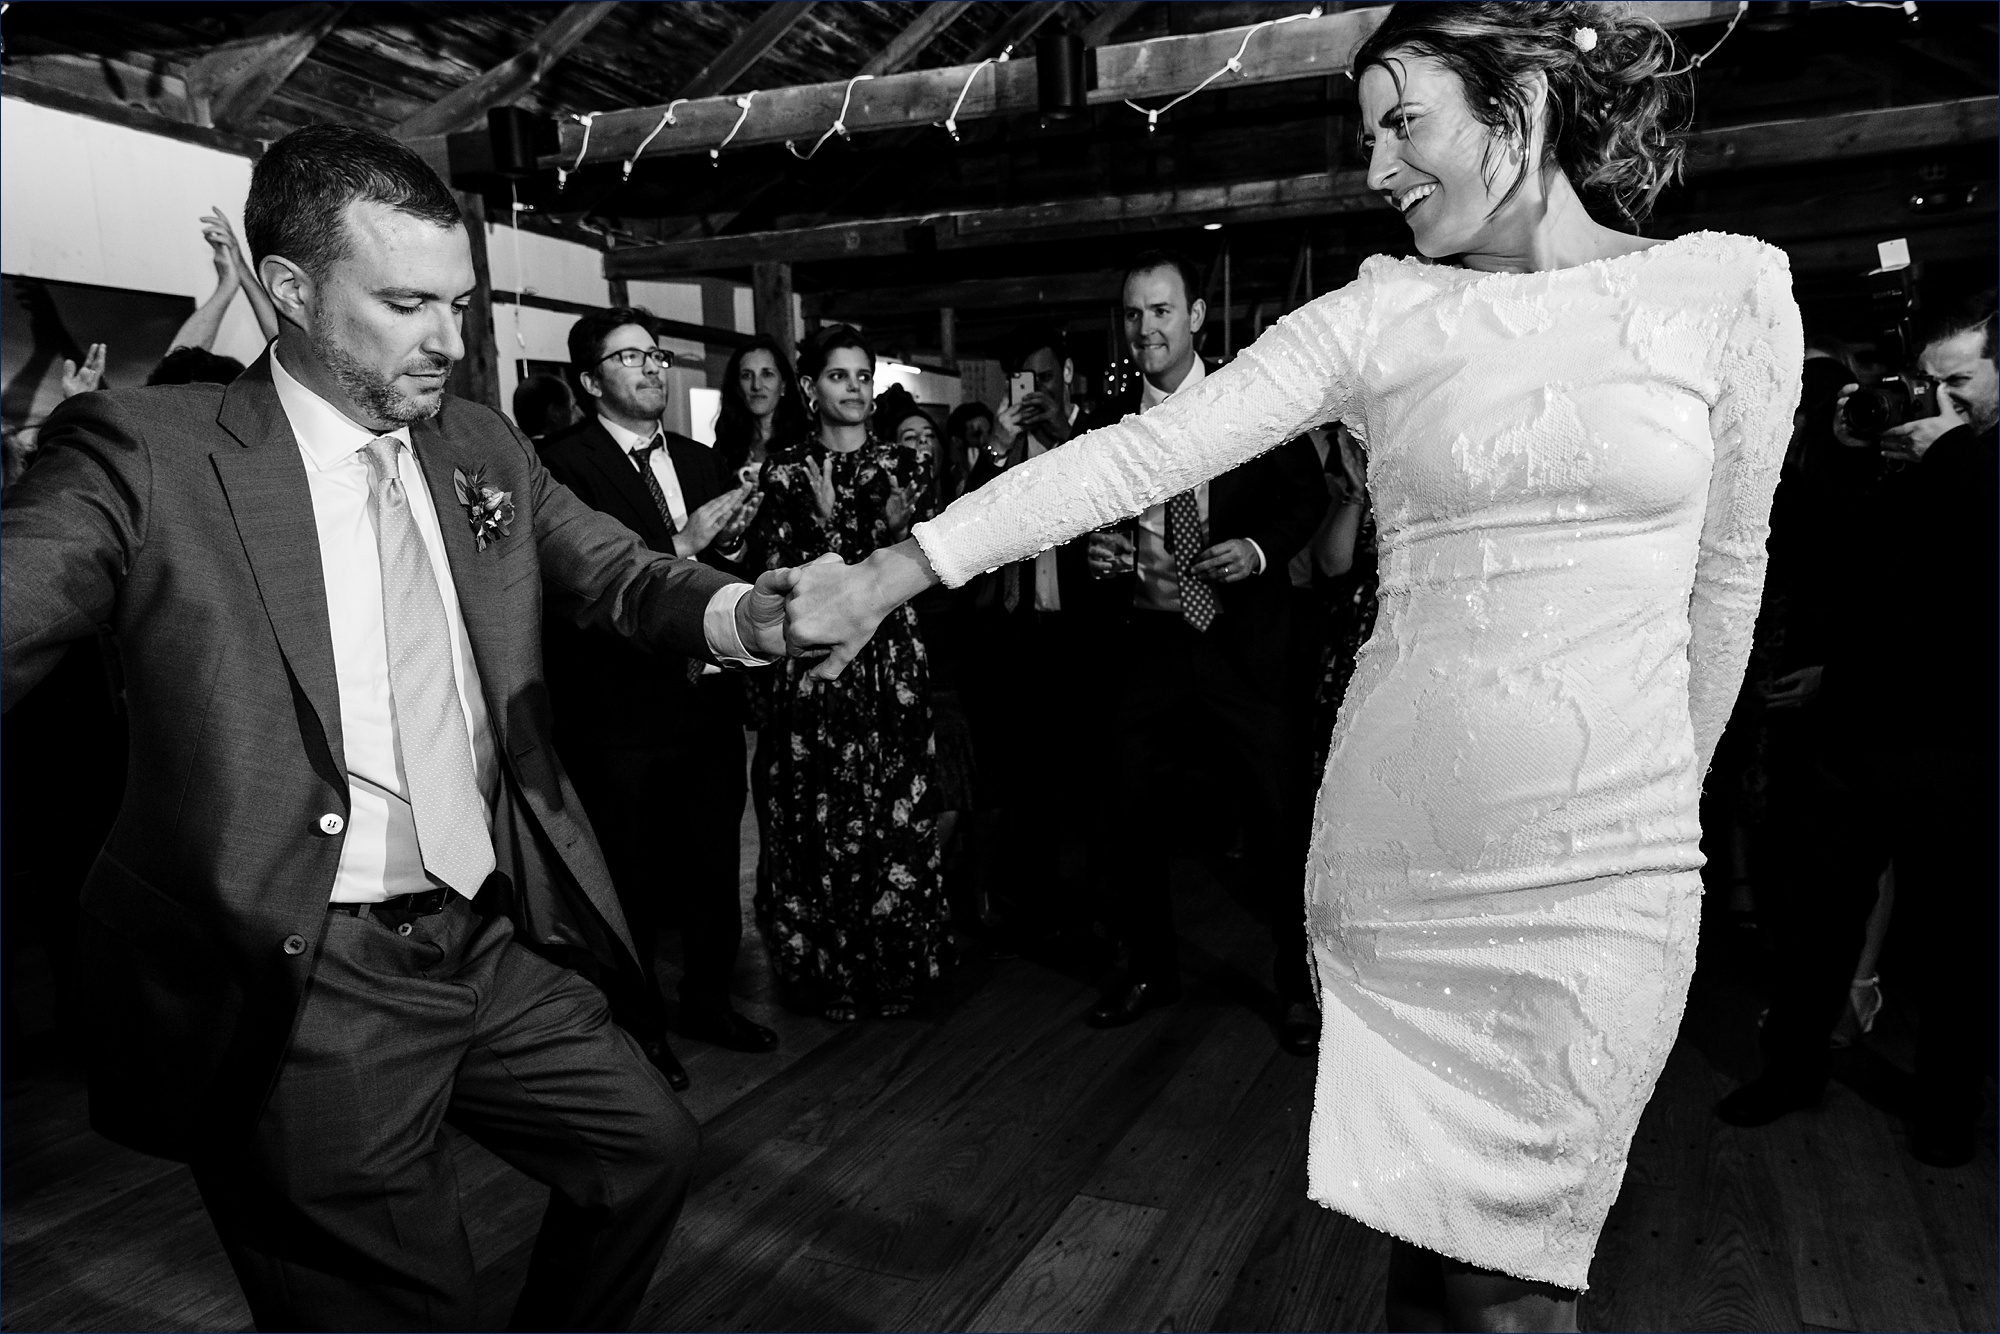 The bride and groom make it official on the dance floor at their Maine wedding reception 